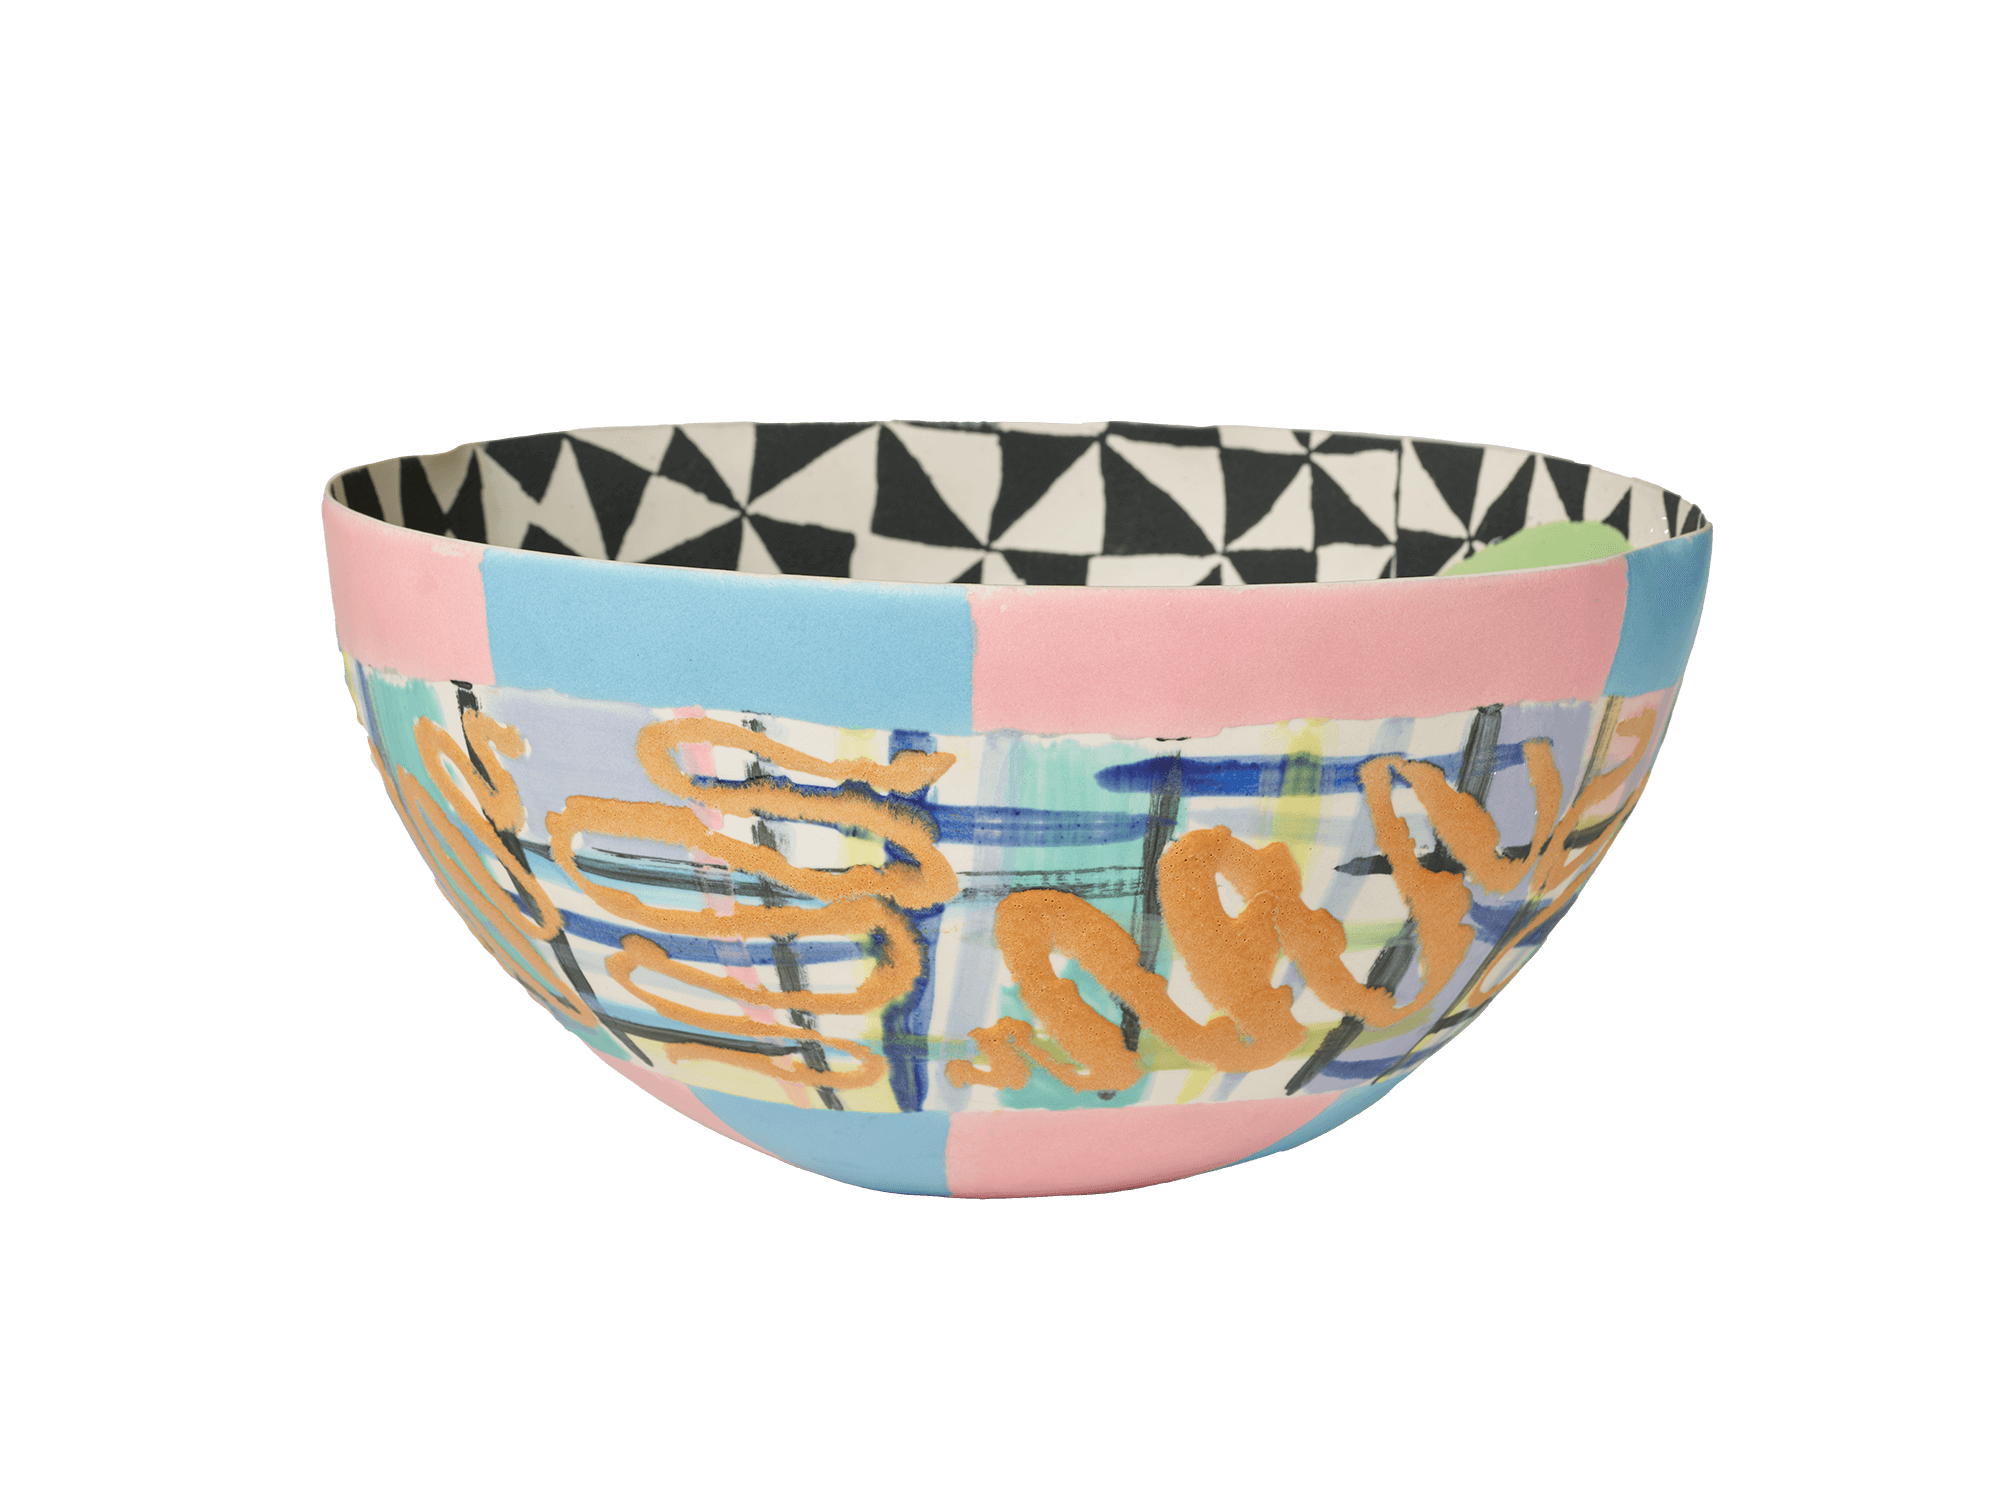 /Bowl%20with%20multicolored%20lines%20and%20blocks%20of%20blue%20and%20pink%20at%20the%20top%20and%20bottom%20of%20exterior.%20Black%20and%20white%20geometric%20design%20on%20the%20interior.%20